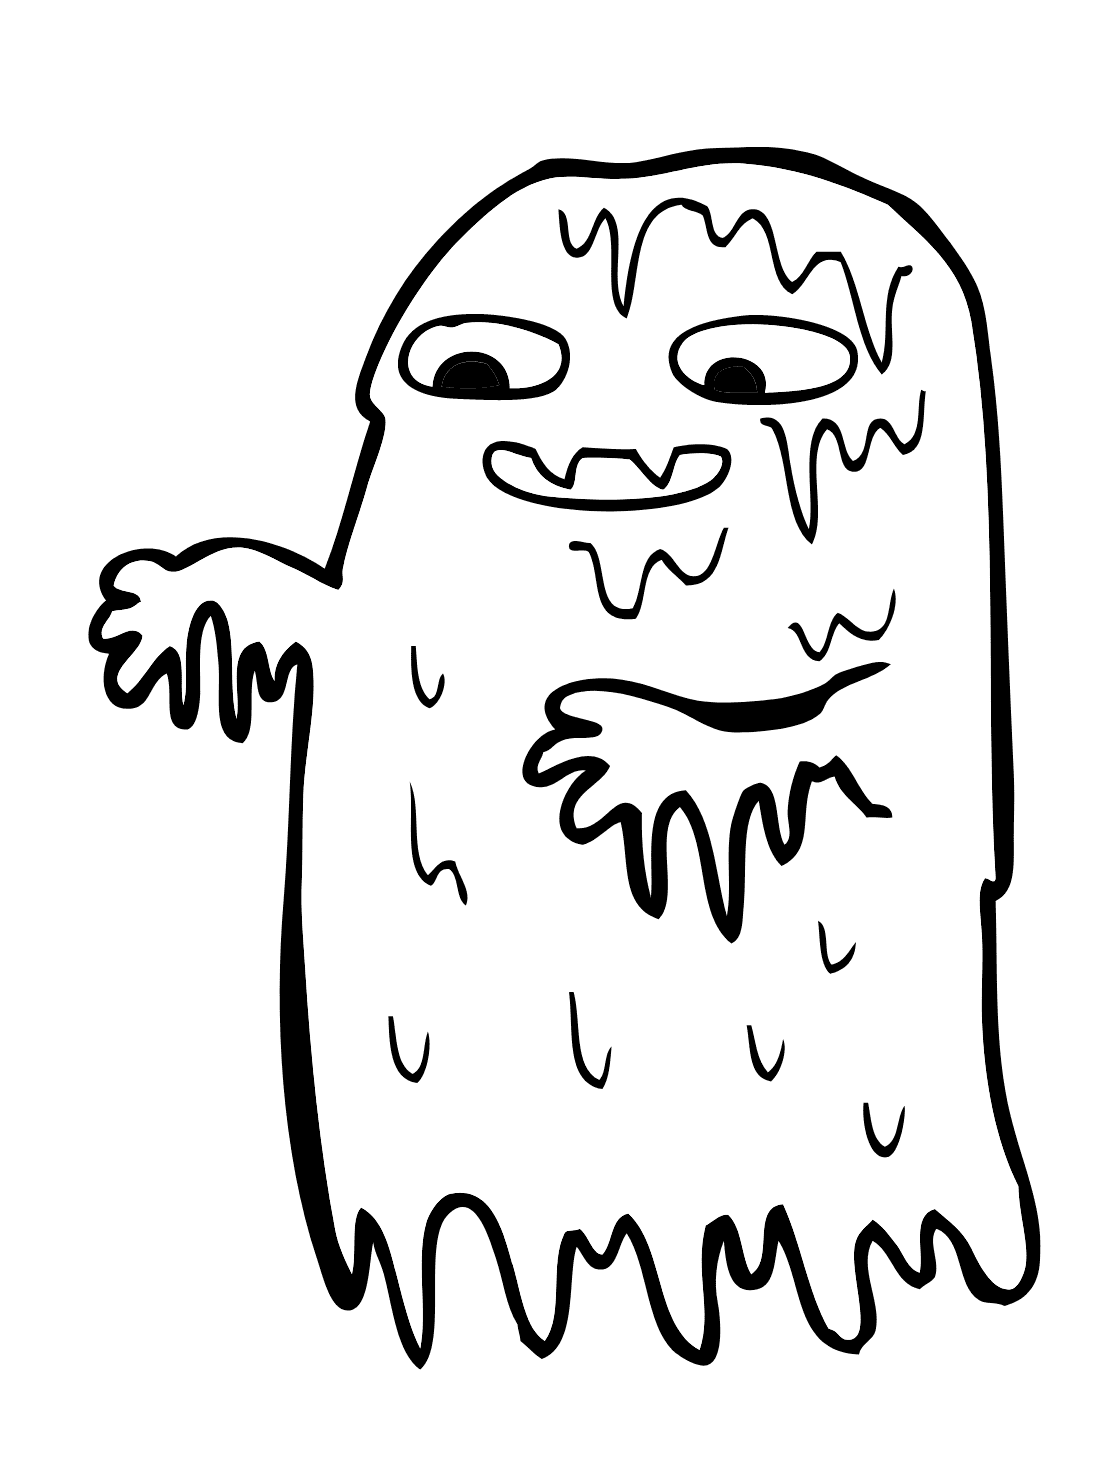 Slime ghost for adult